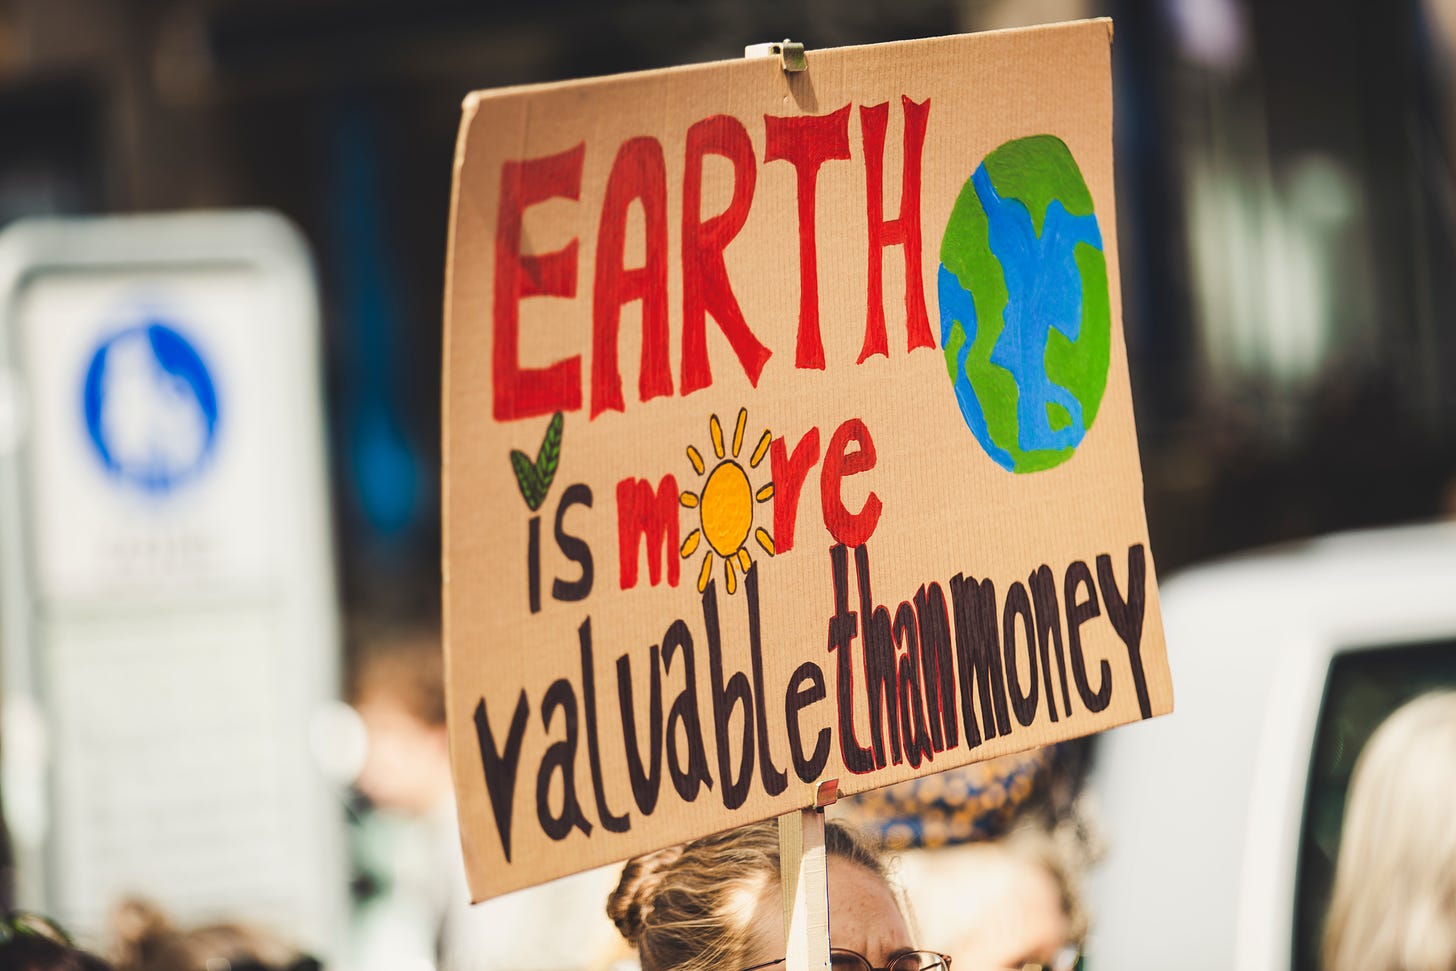 A cardboard protest sign reads "Earth is more valuable than money."